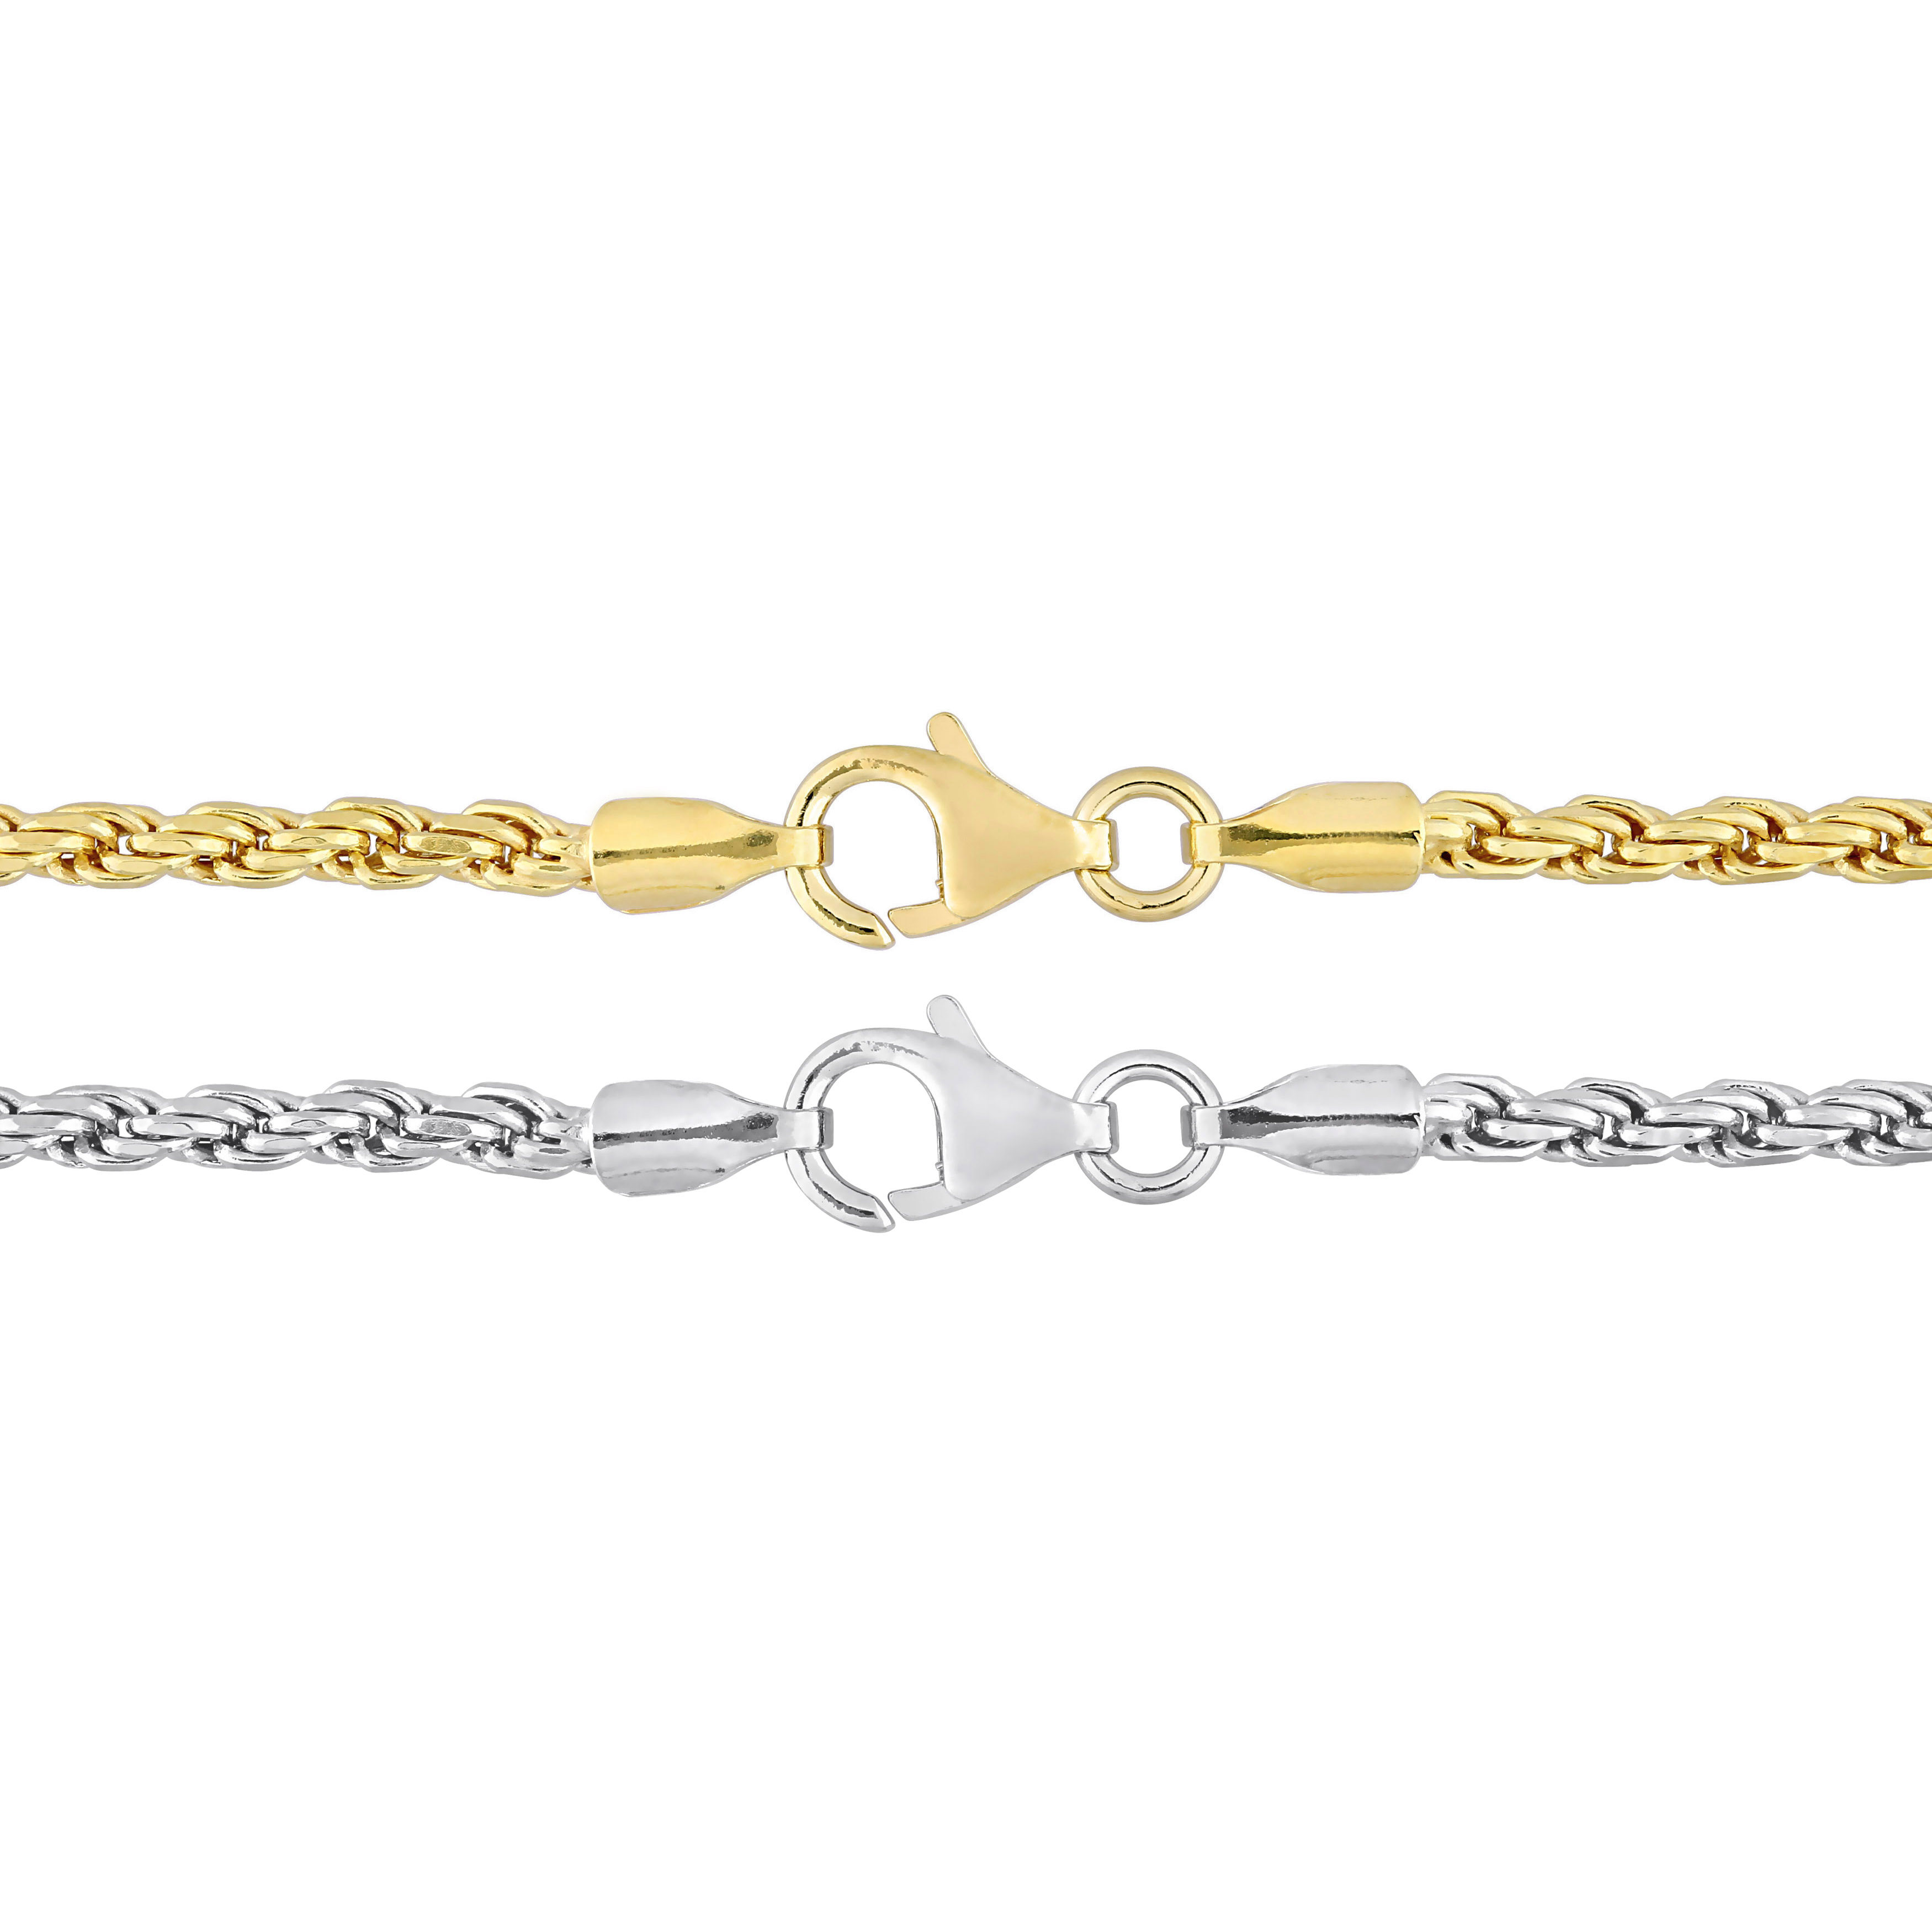 2.2MM Rope Chain Necklace Set in 2-Tone 18K Yellow Gold Plated Sterling Silver